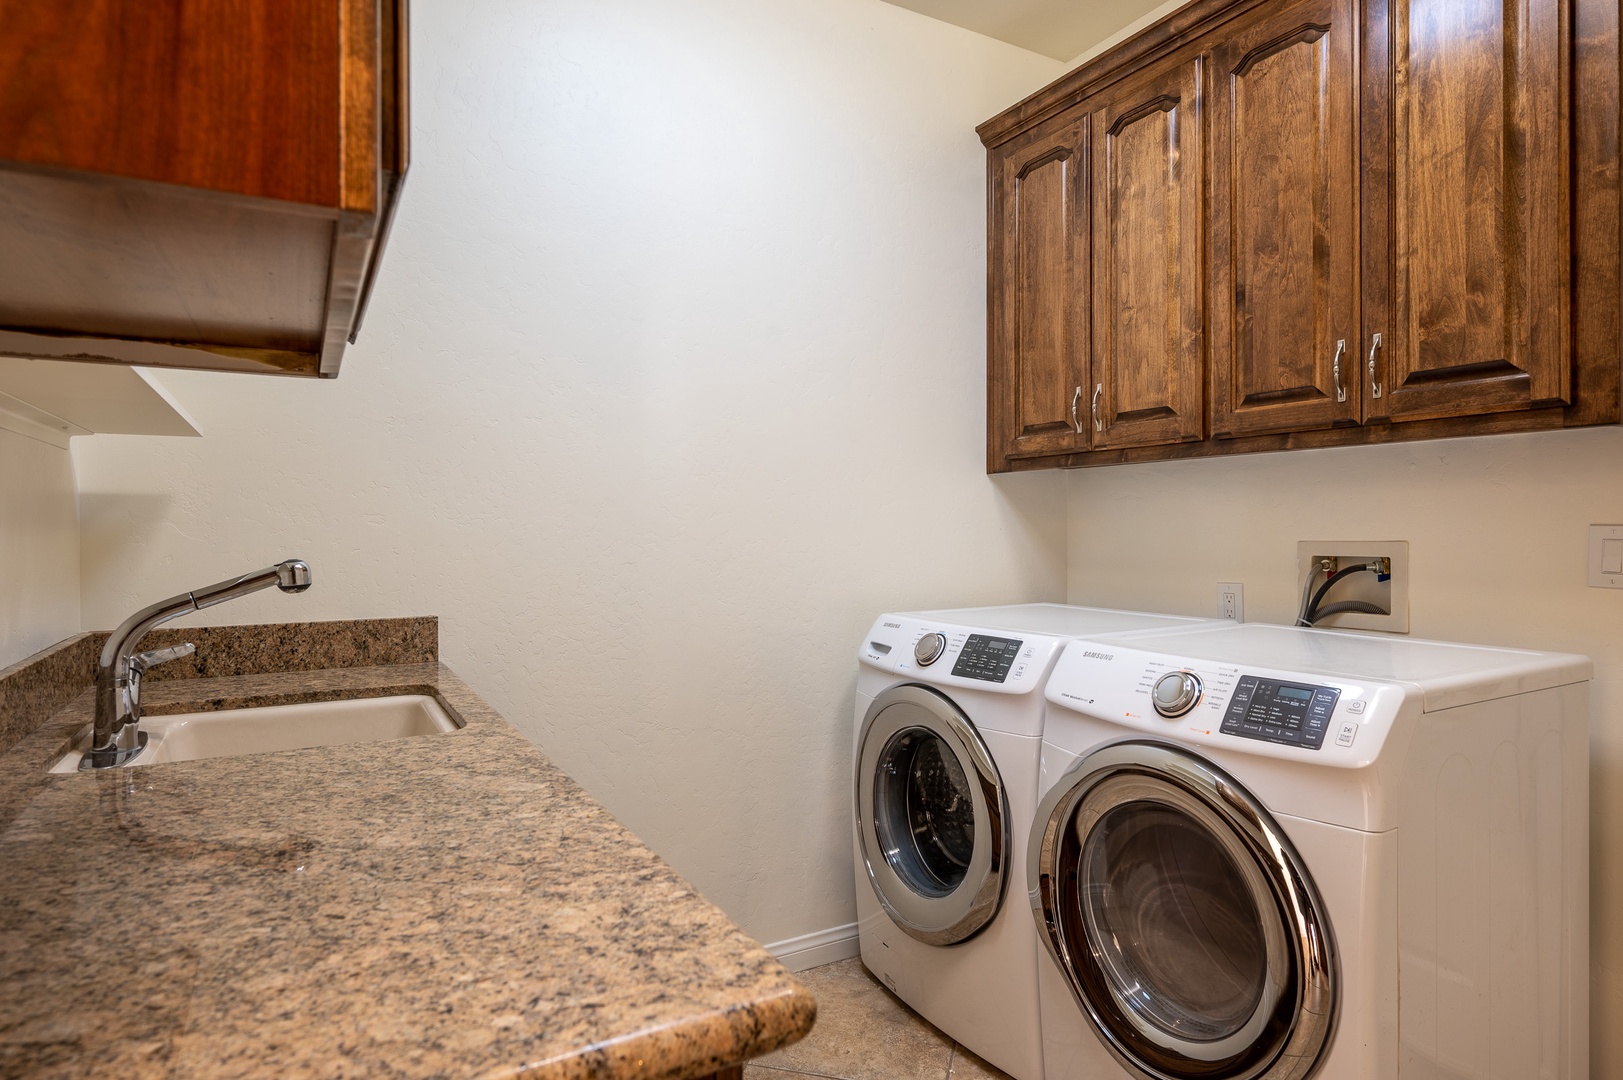 Washer and dryer included in the home for use during your stay